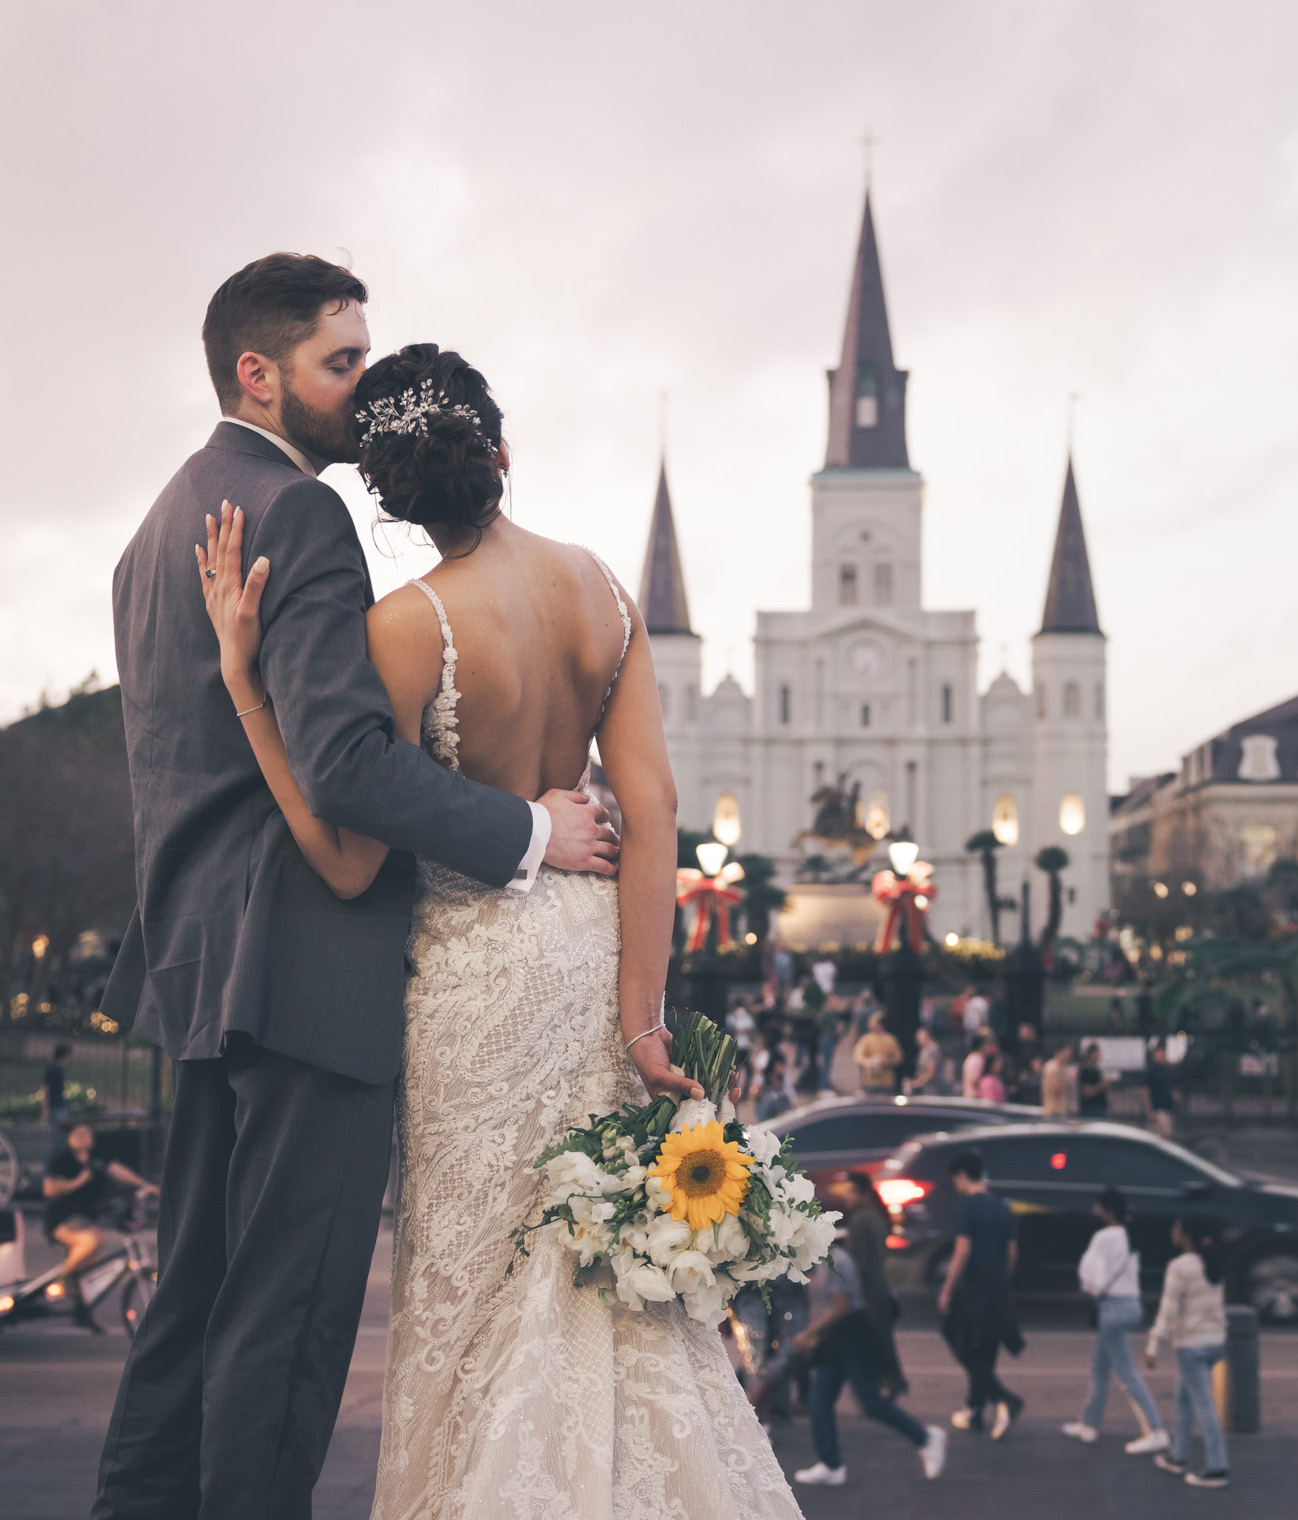 A groom kisses his bride on the head as they look at the busy streets of the French Quarter in New Orleans during their wedding day.